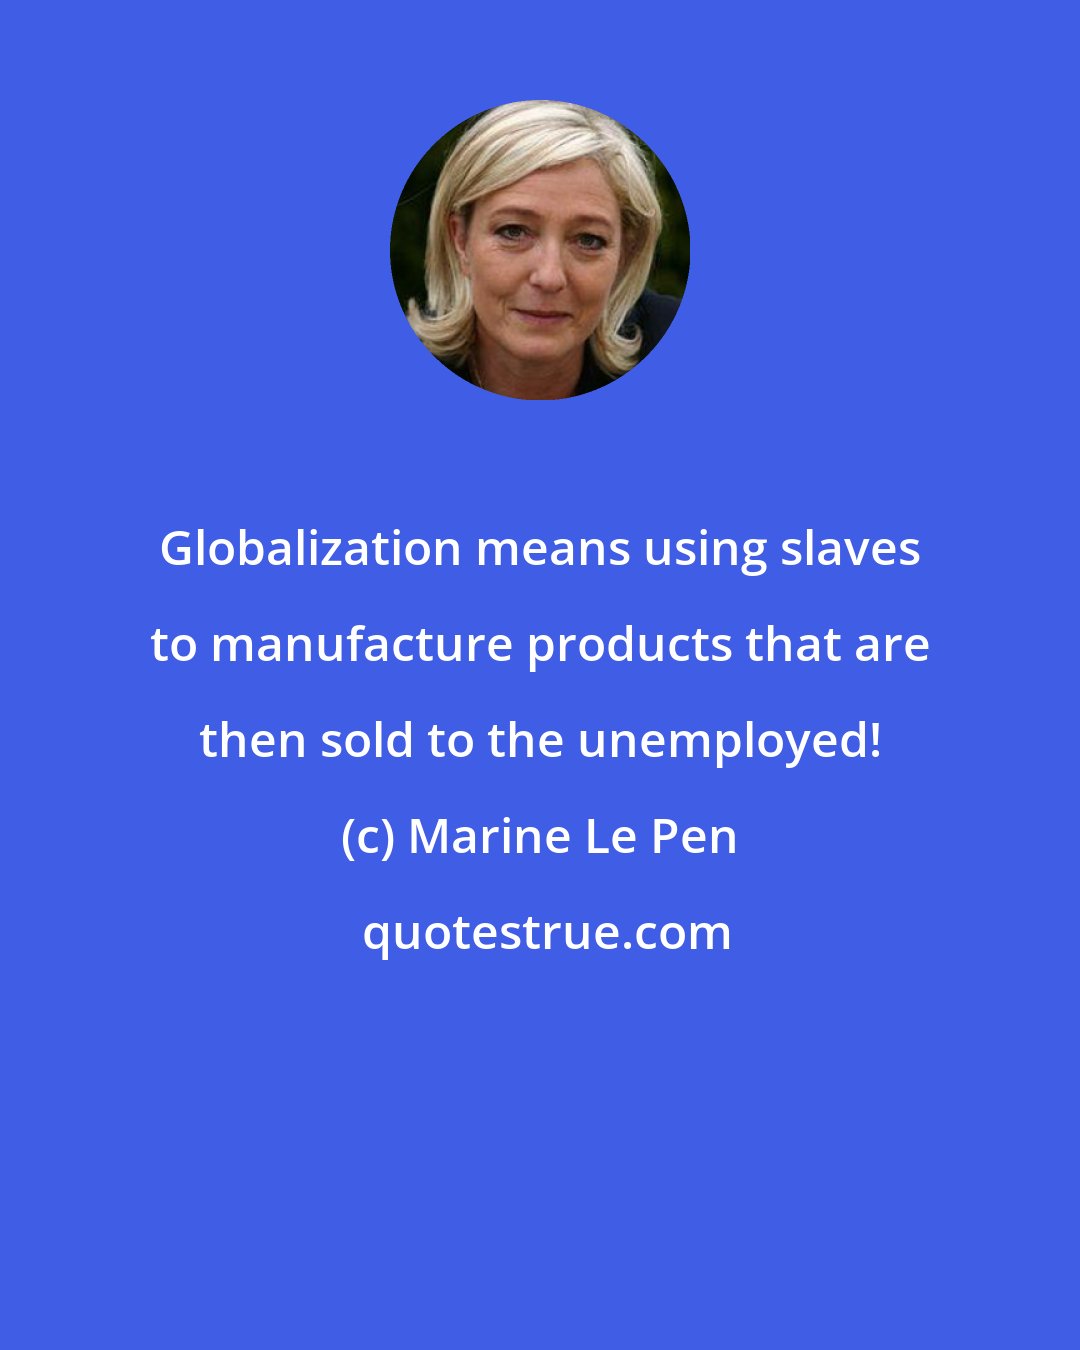 Marine Le Pen: Globalization means using slaves to manufacture products that are then sold to the unemployed!